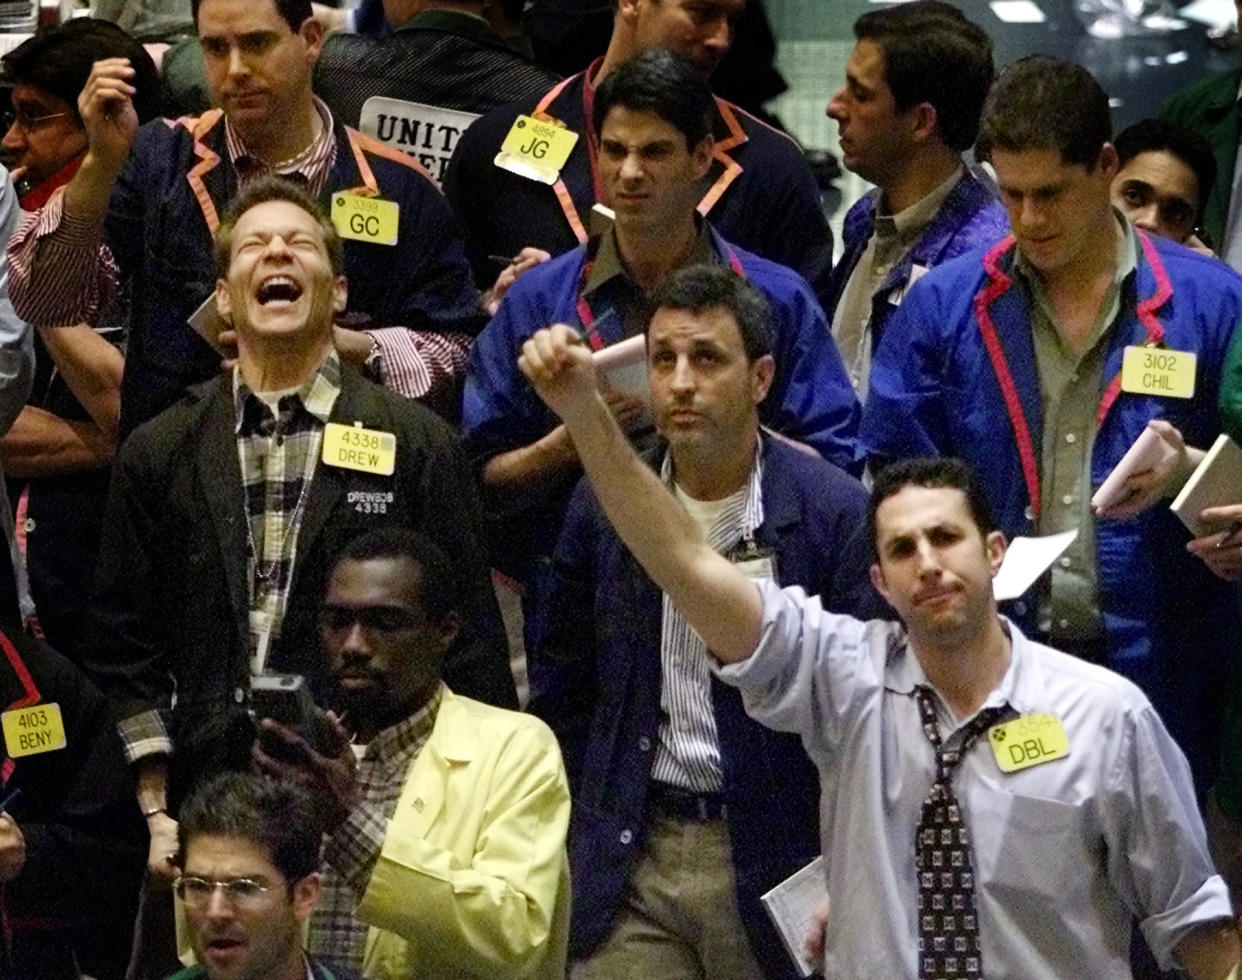 Traders work in the Natural Gas Futures pit on the New York Mercantile Exchange, December 7, 2000. Gas prices settled down Thursday after rocketing to an all-time record high December 6 of $9.539 per million British Thermal Units (mmBtu) as cold weather was predicted to last throughout the Eastern United States over the next few weeks.

MS/ME